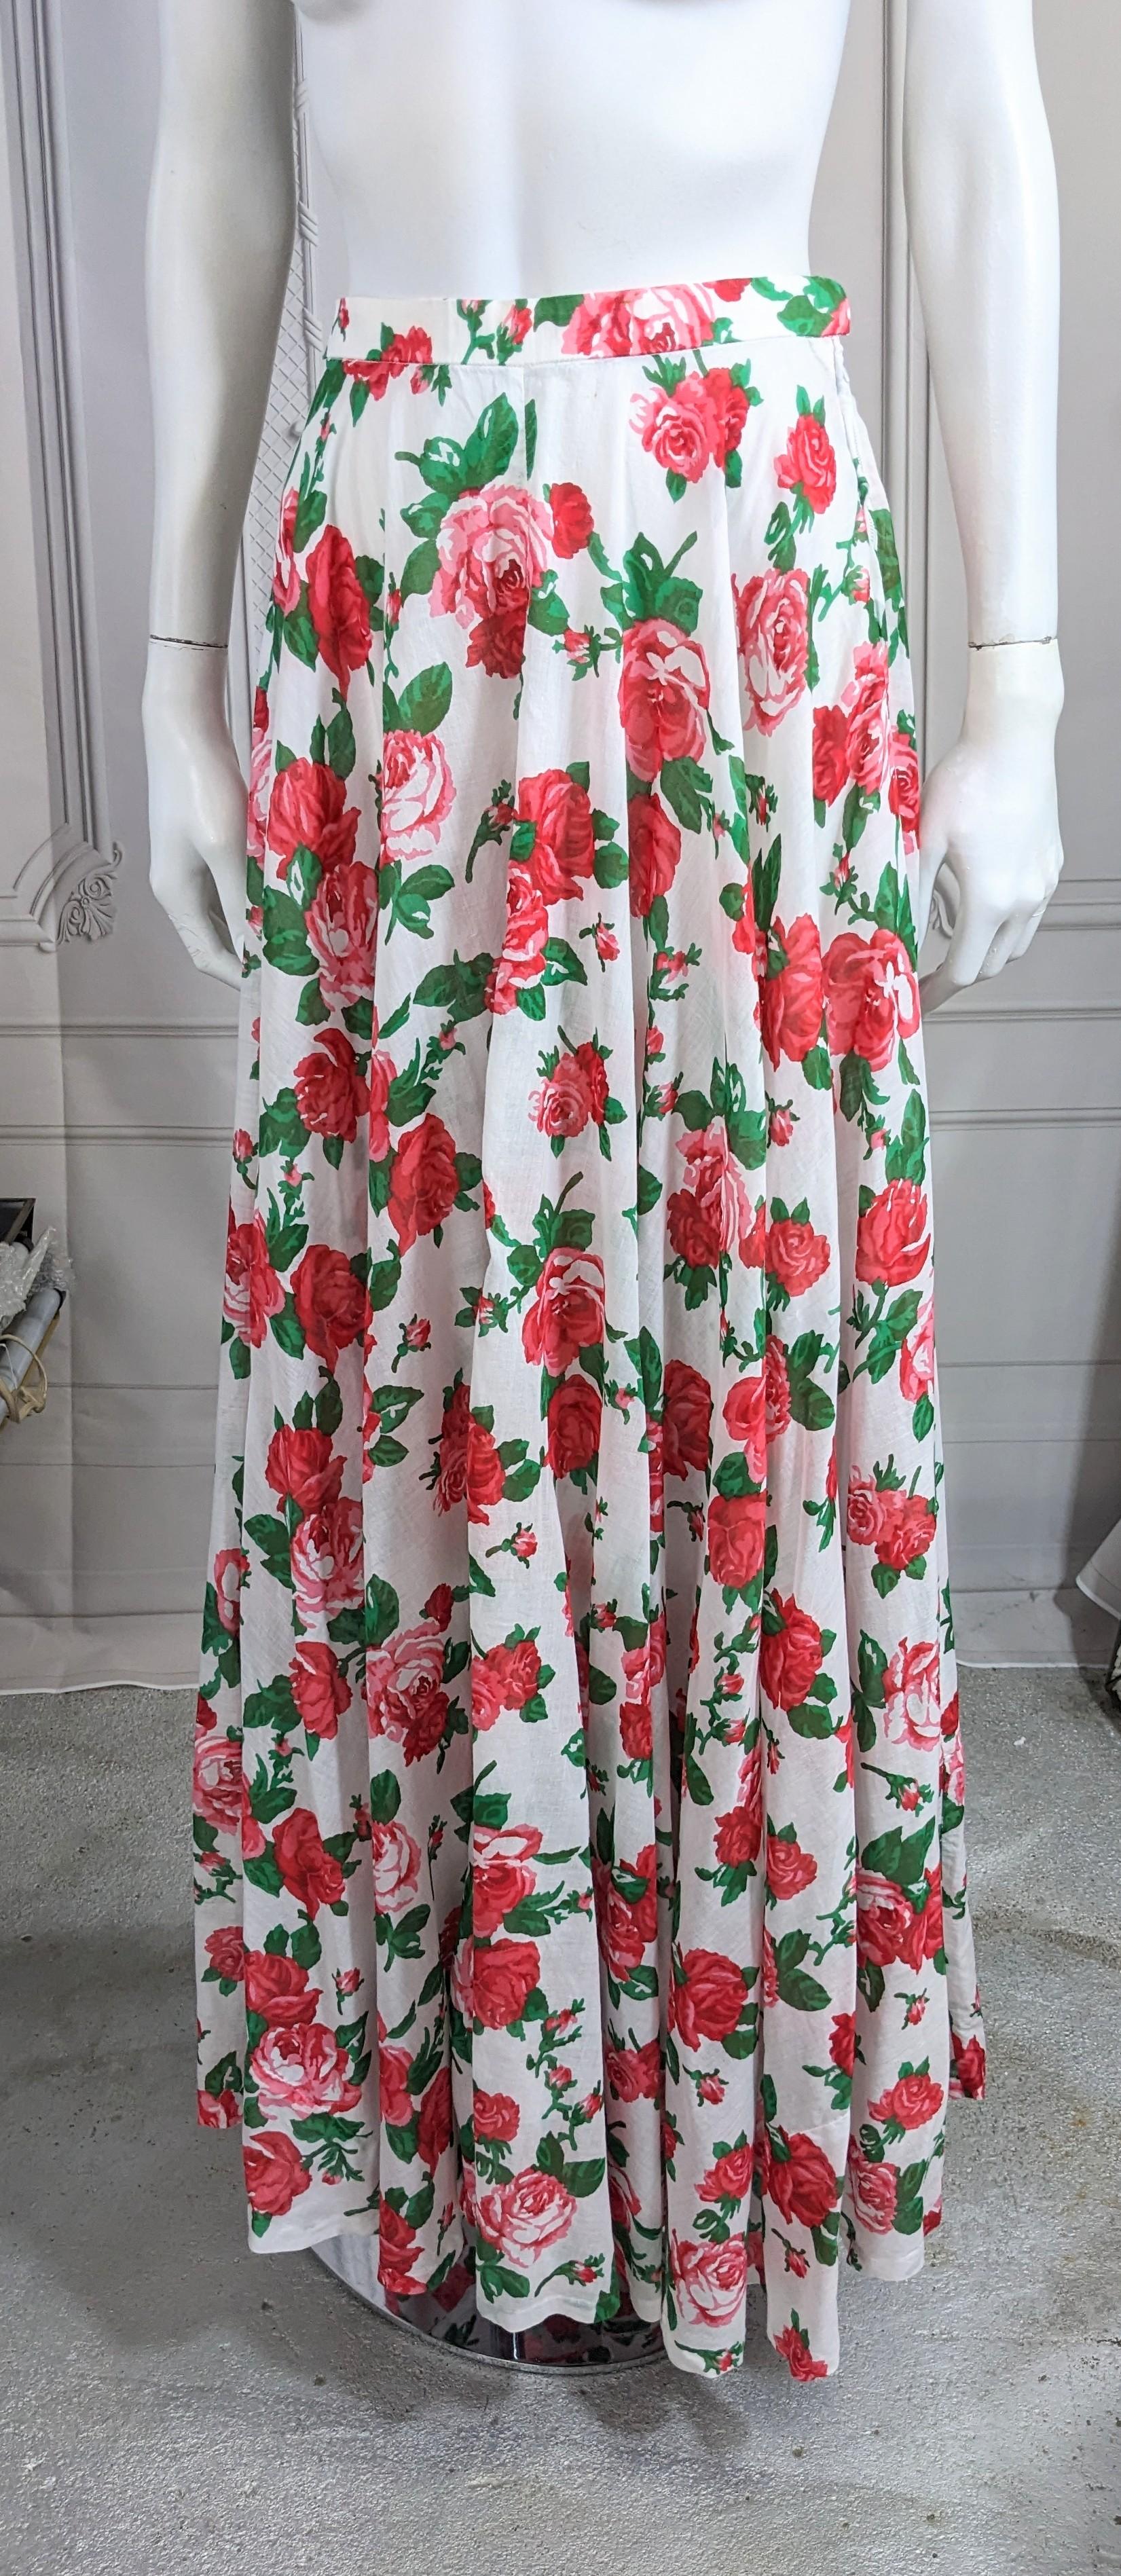 Rare Yves Saint Laurent Rive Gauche Early Halter Ensemble in Boussac Rose printed cotton batiste. A super full floor length circle skirt is paired with a wrap halter top. An additional belt is included for use in hair or other styling purposes. The